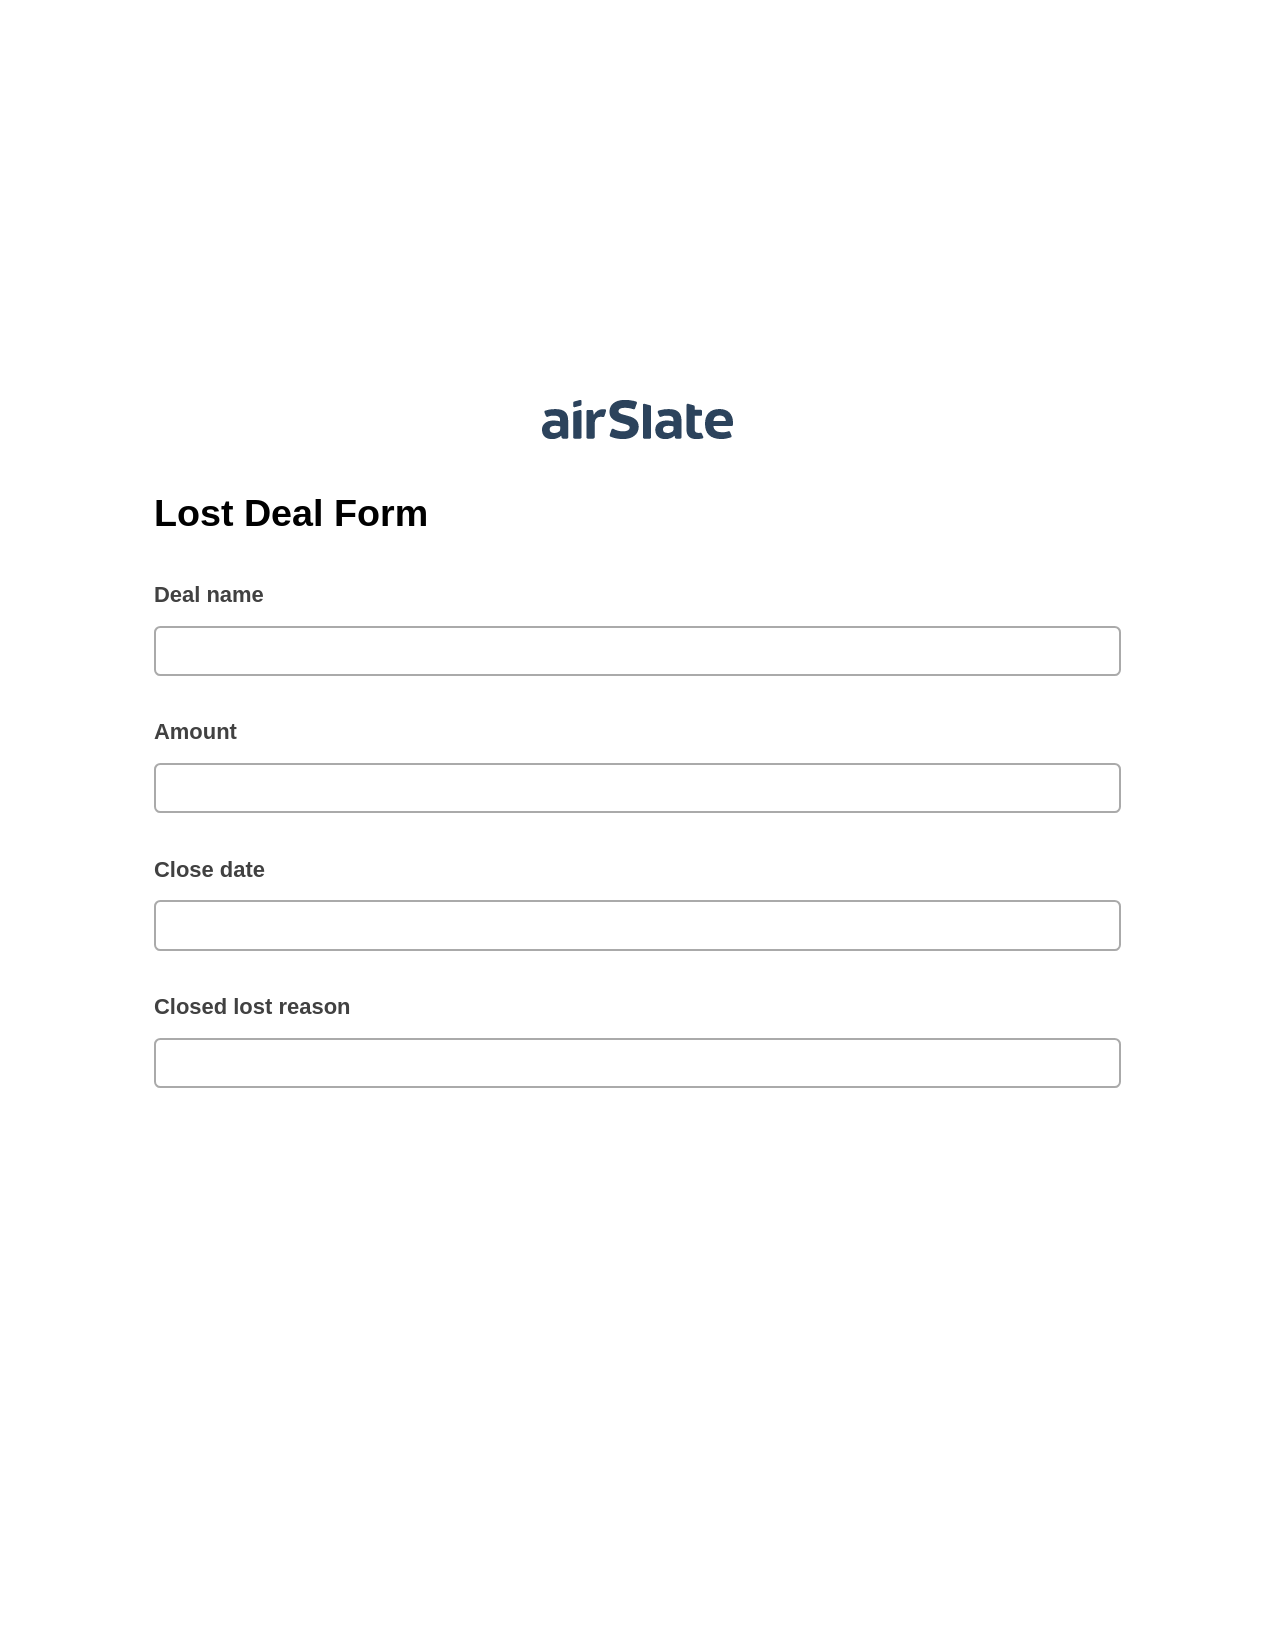 Lost Deal Form Pre-fill from Salesforce Records with SOQL Bot, Webhook Bot, Webhook Postfinish Bot